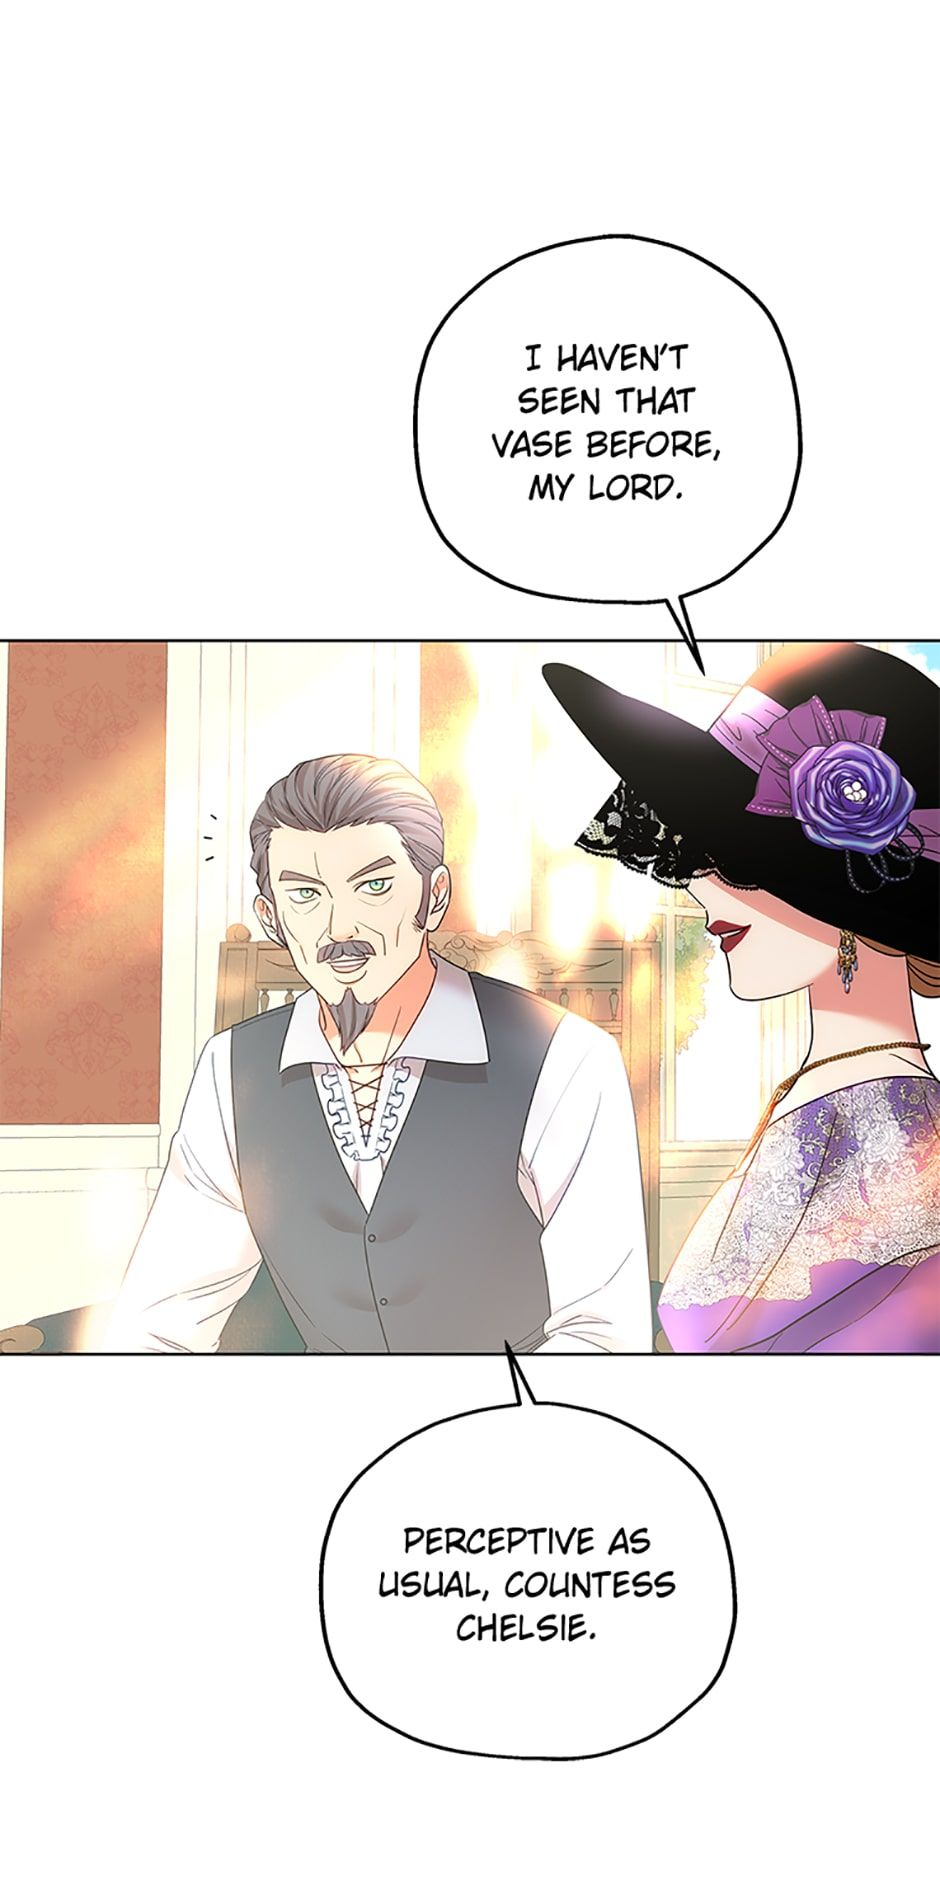 The Crownless Queen chapter 15